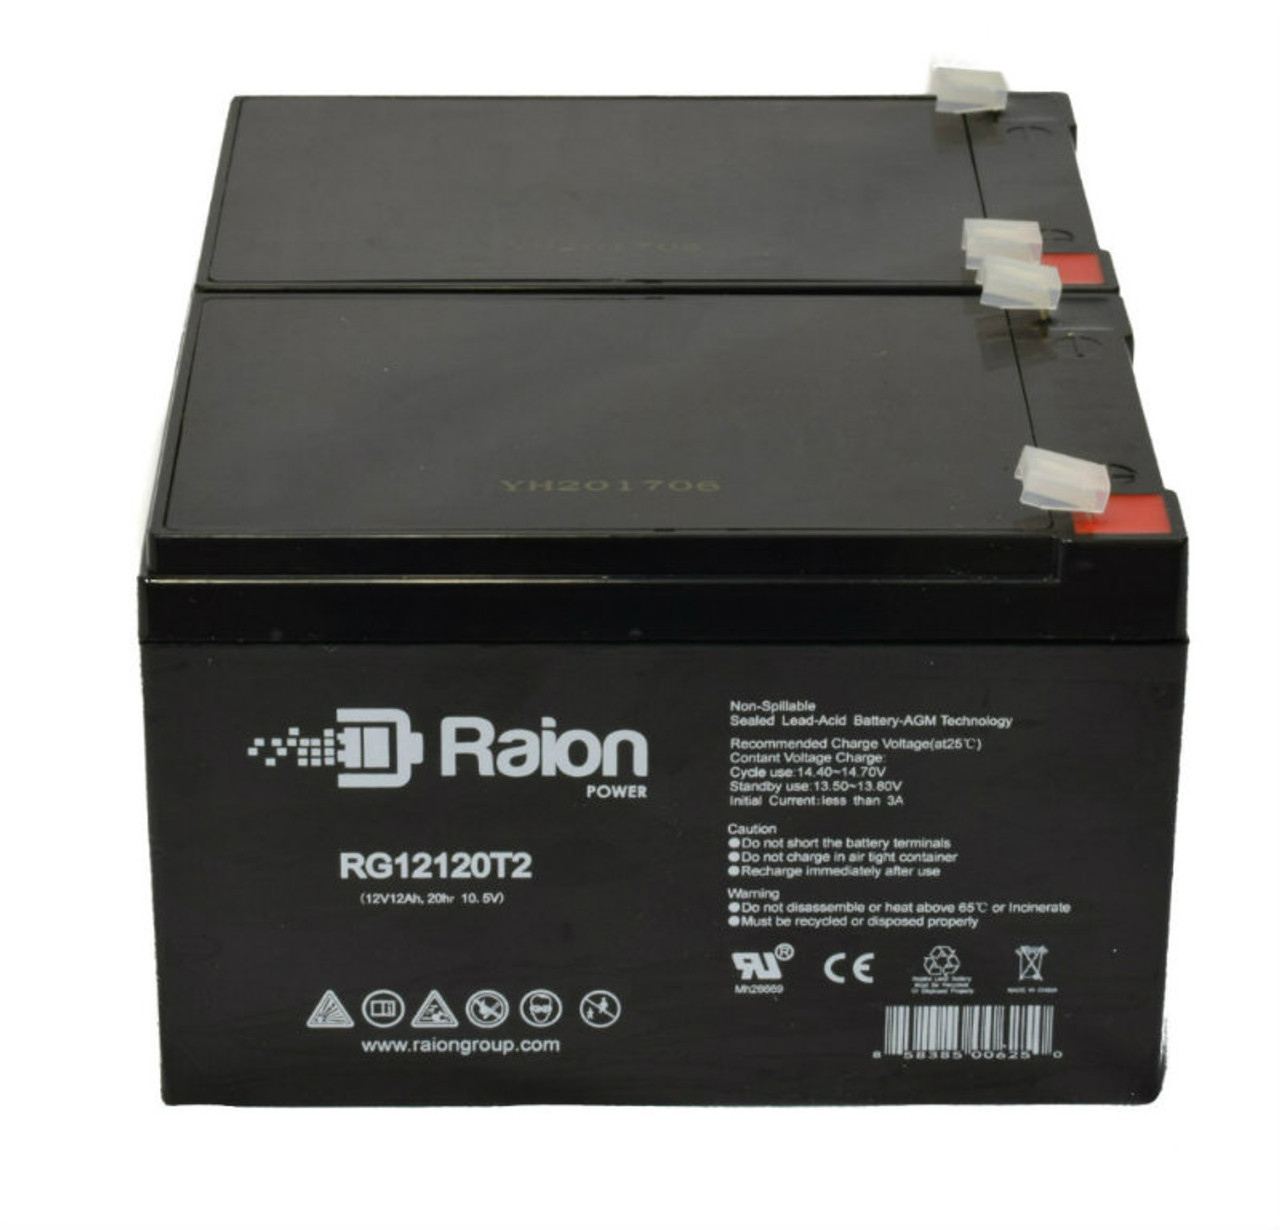 Raion Power 12V 12Ah Non-Spillable Compatible Replacement Battery for Telong TL12120 - (2 Pack)